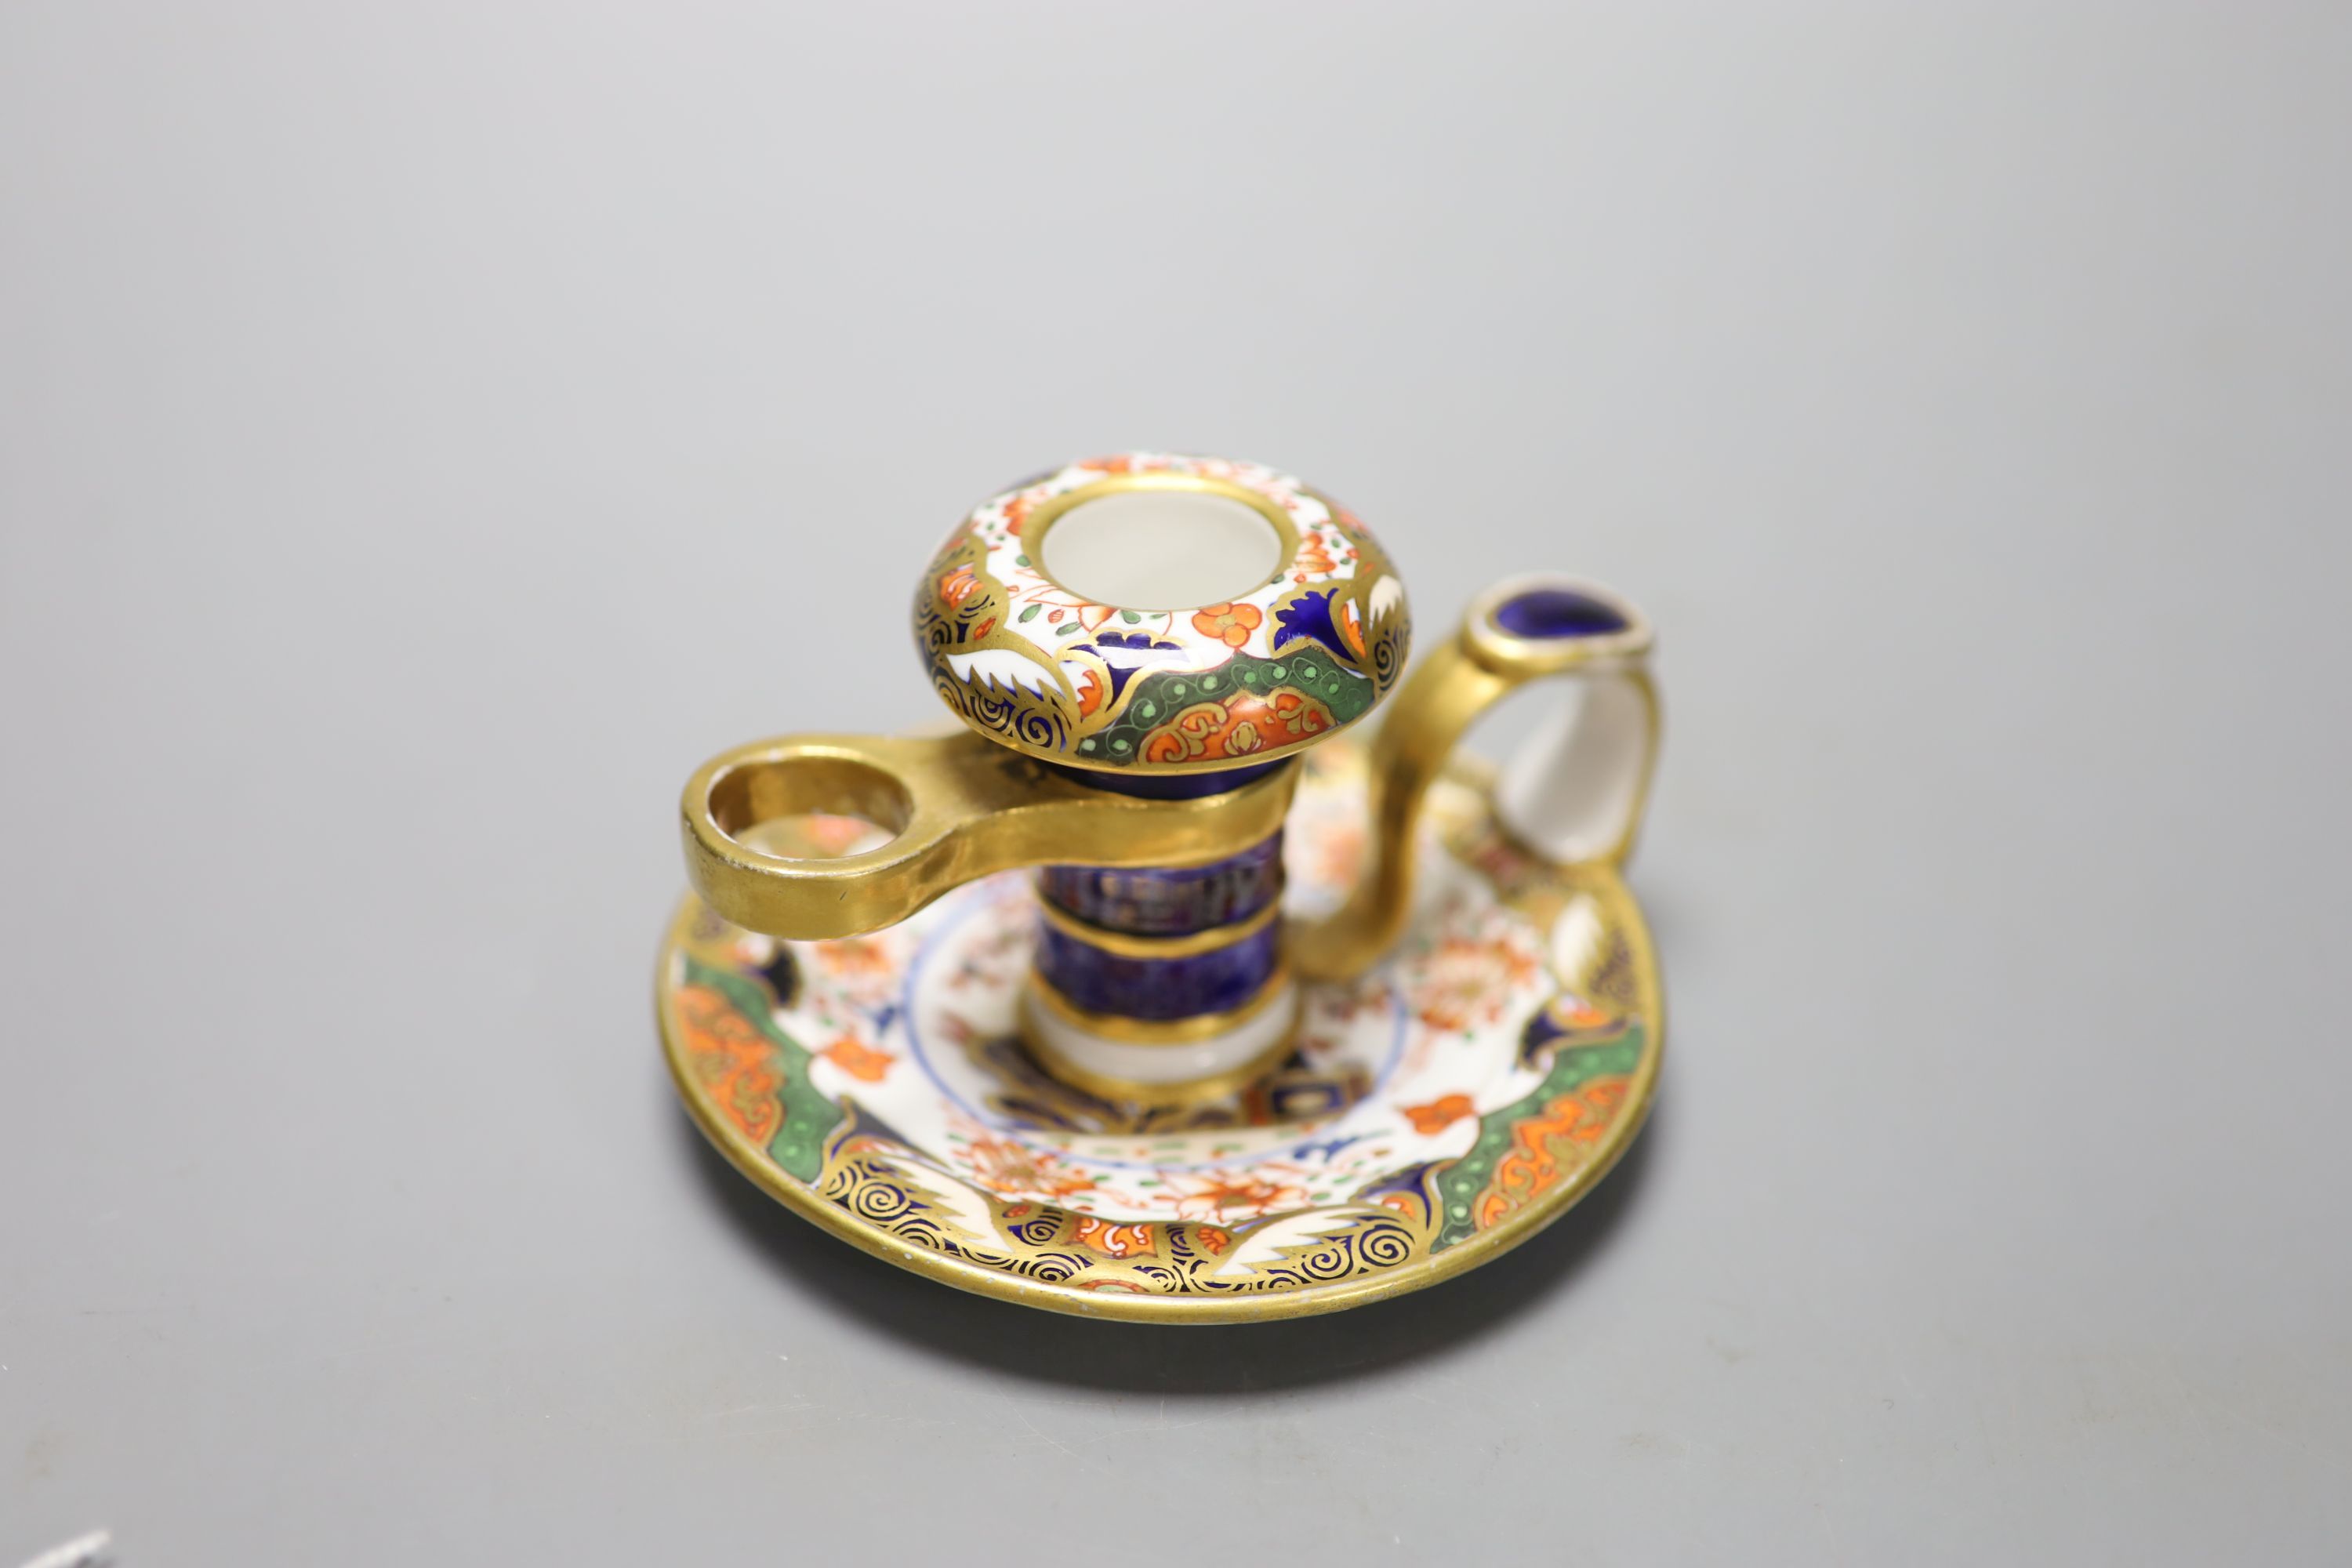 A Spode chamberstick painted with imari pattern 967, Spode mark in red c.1815, height 7cm